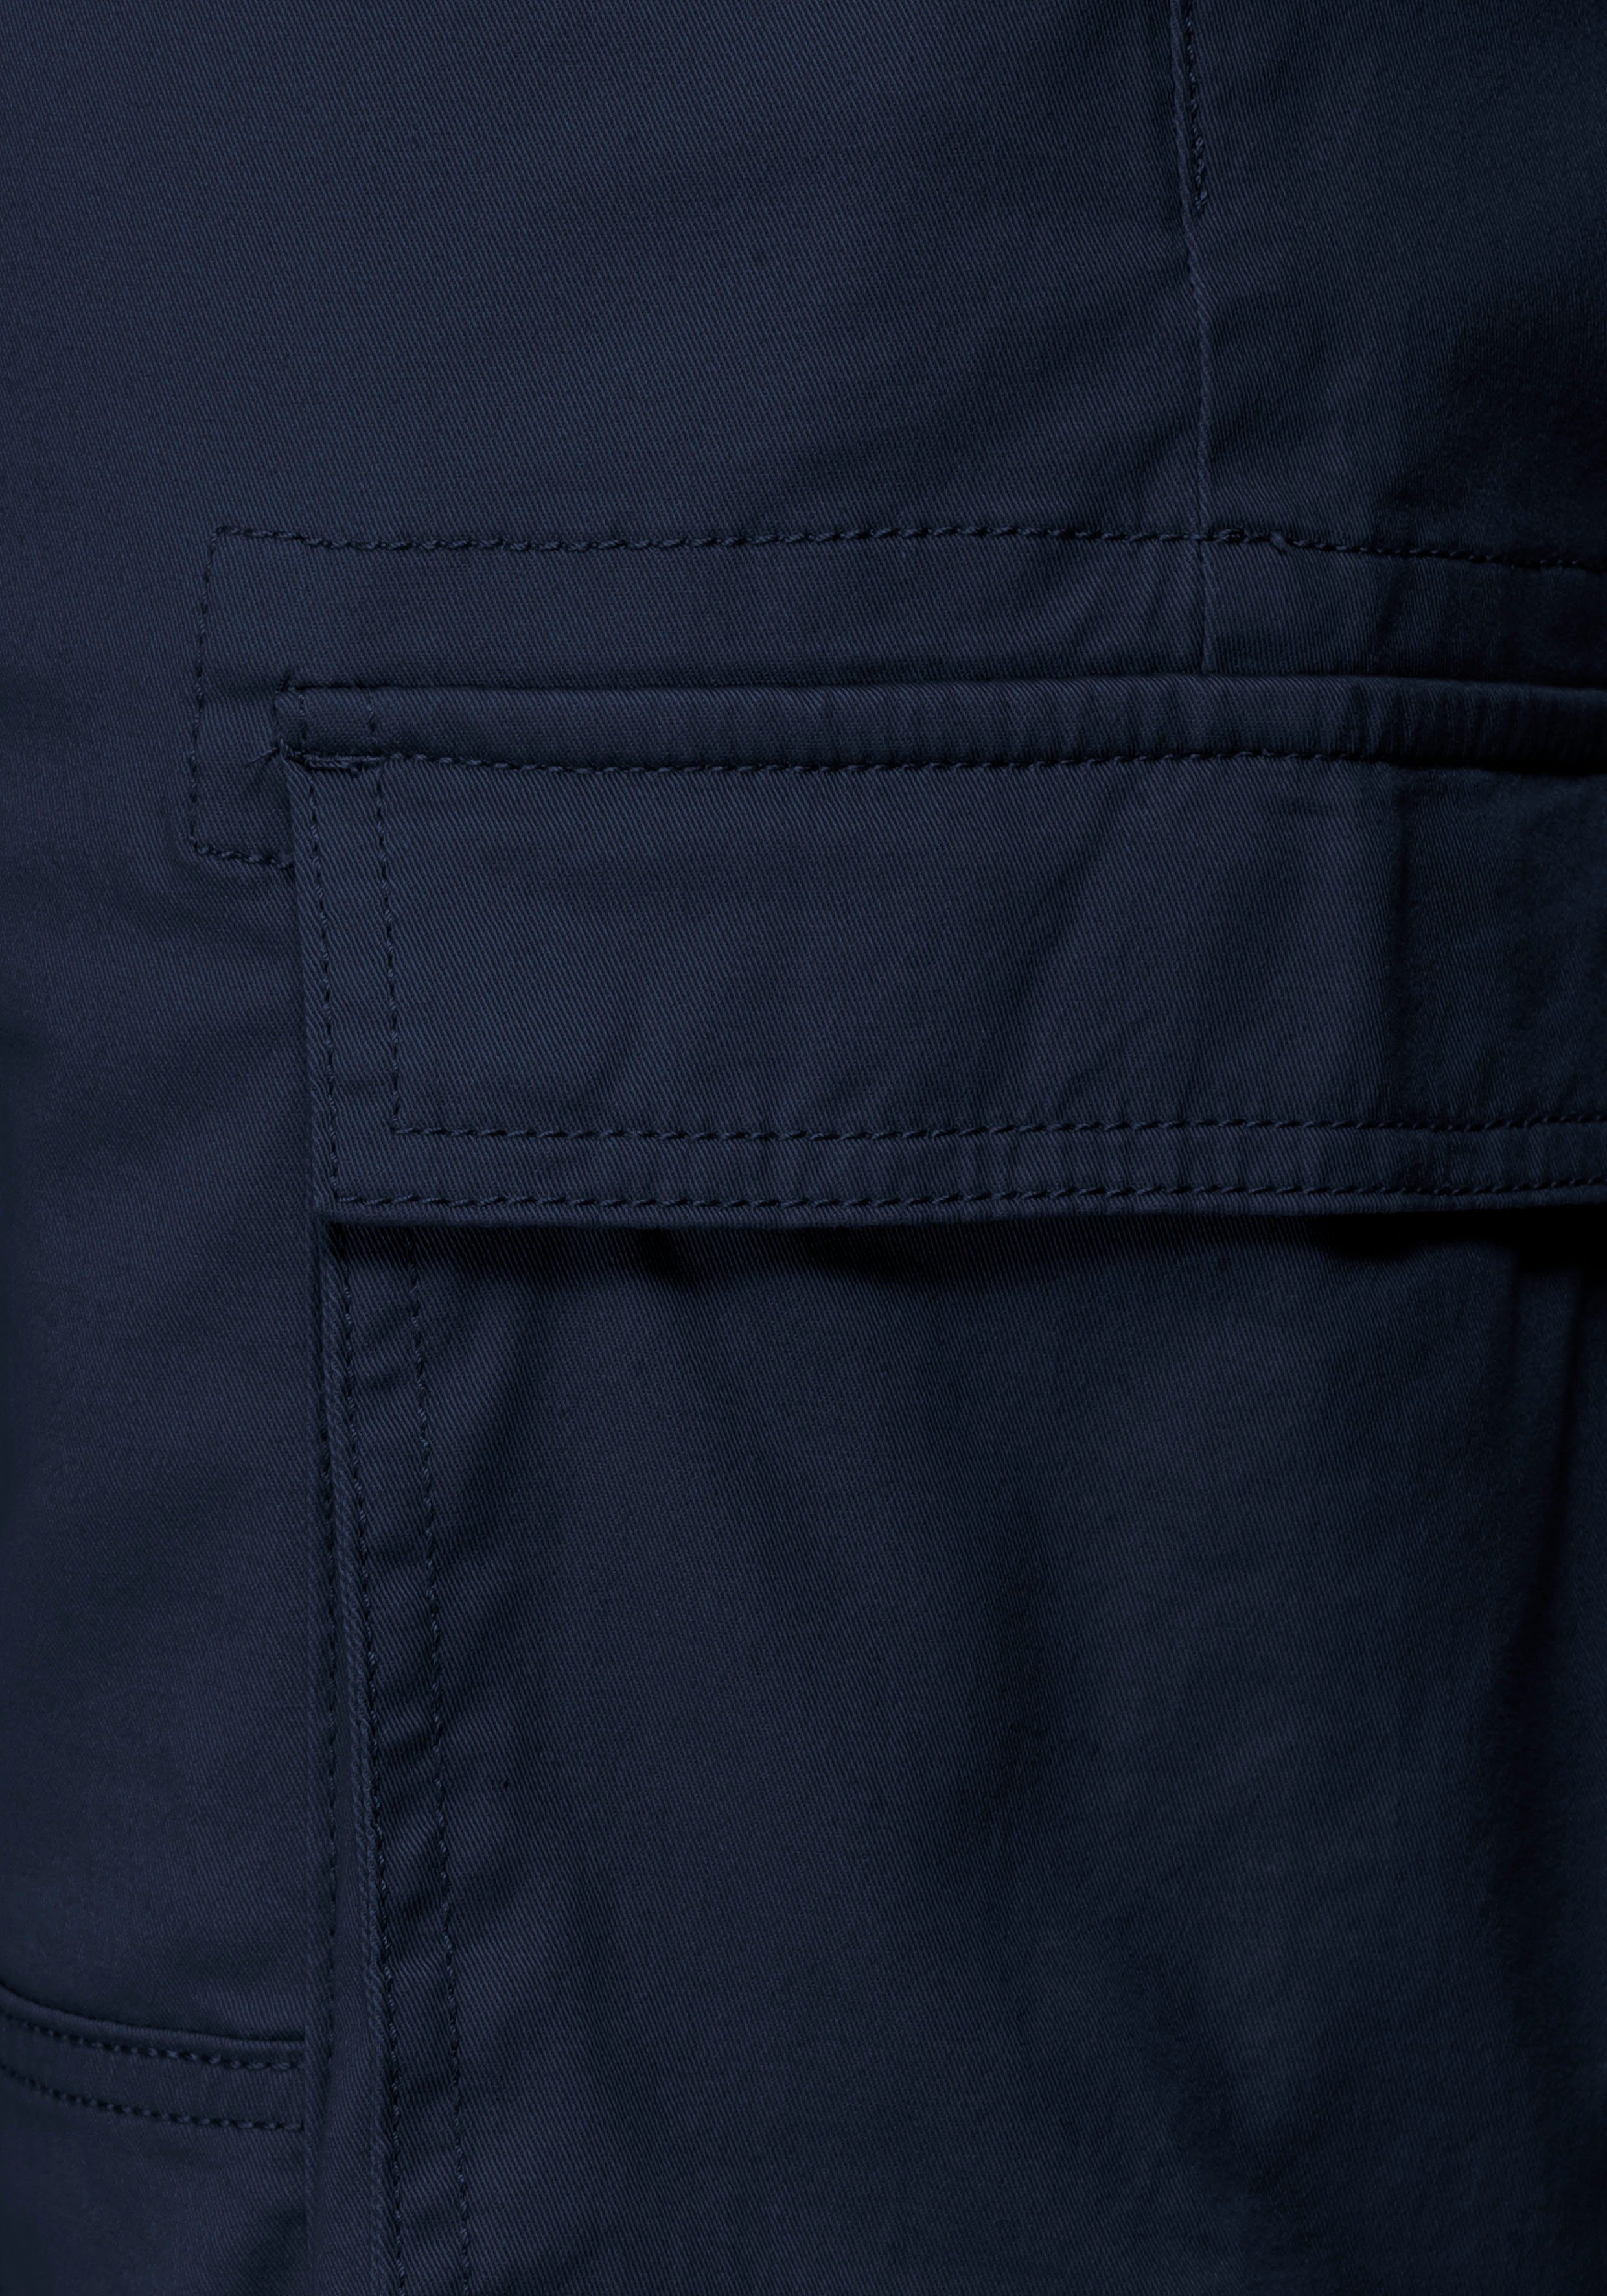 ONLY & SONS navy CARGO SHORTS CAM STAGE Cargoshorts